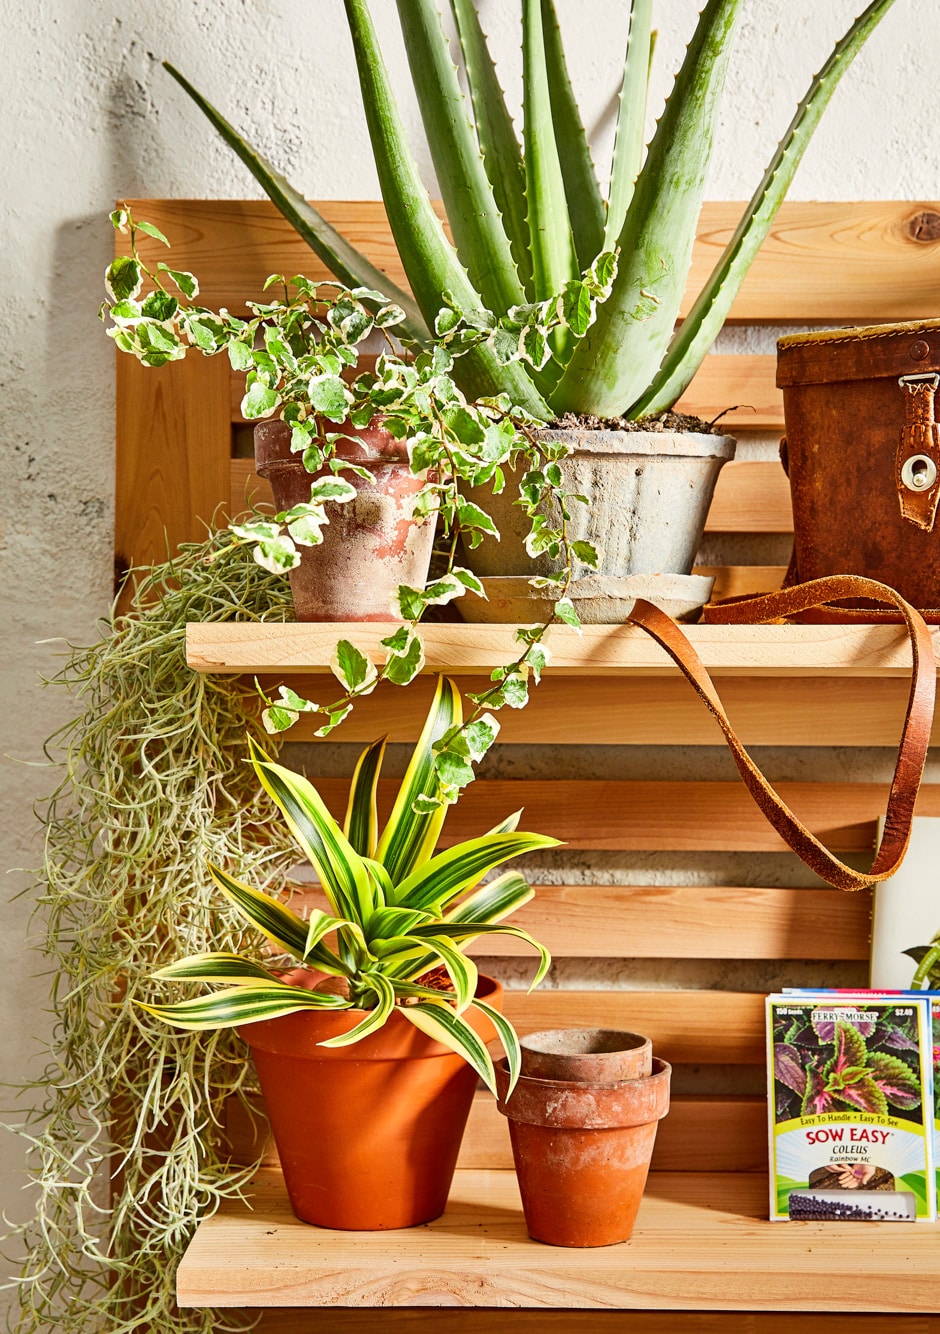 wooden shelves with potted plants